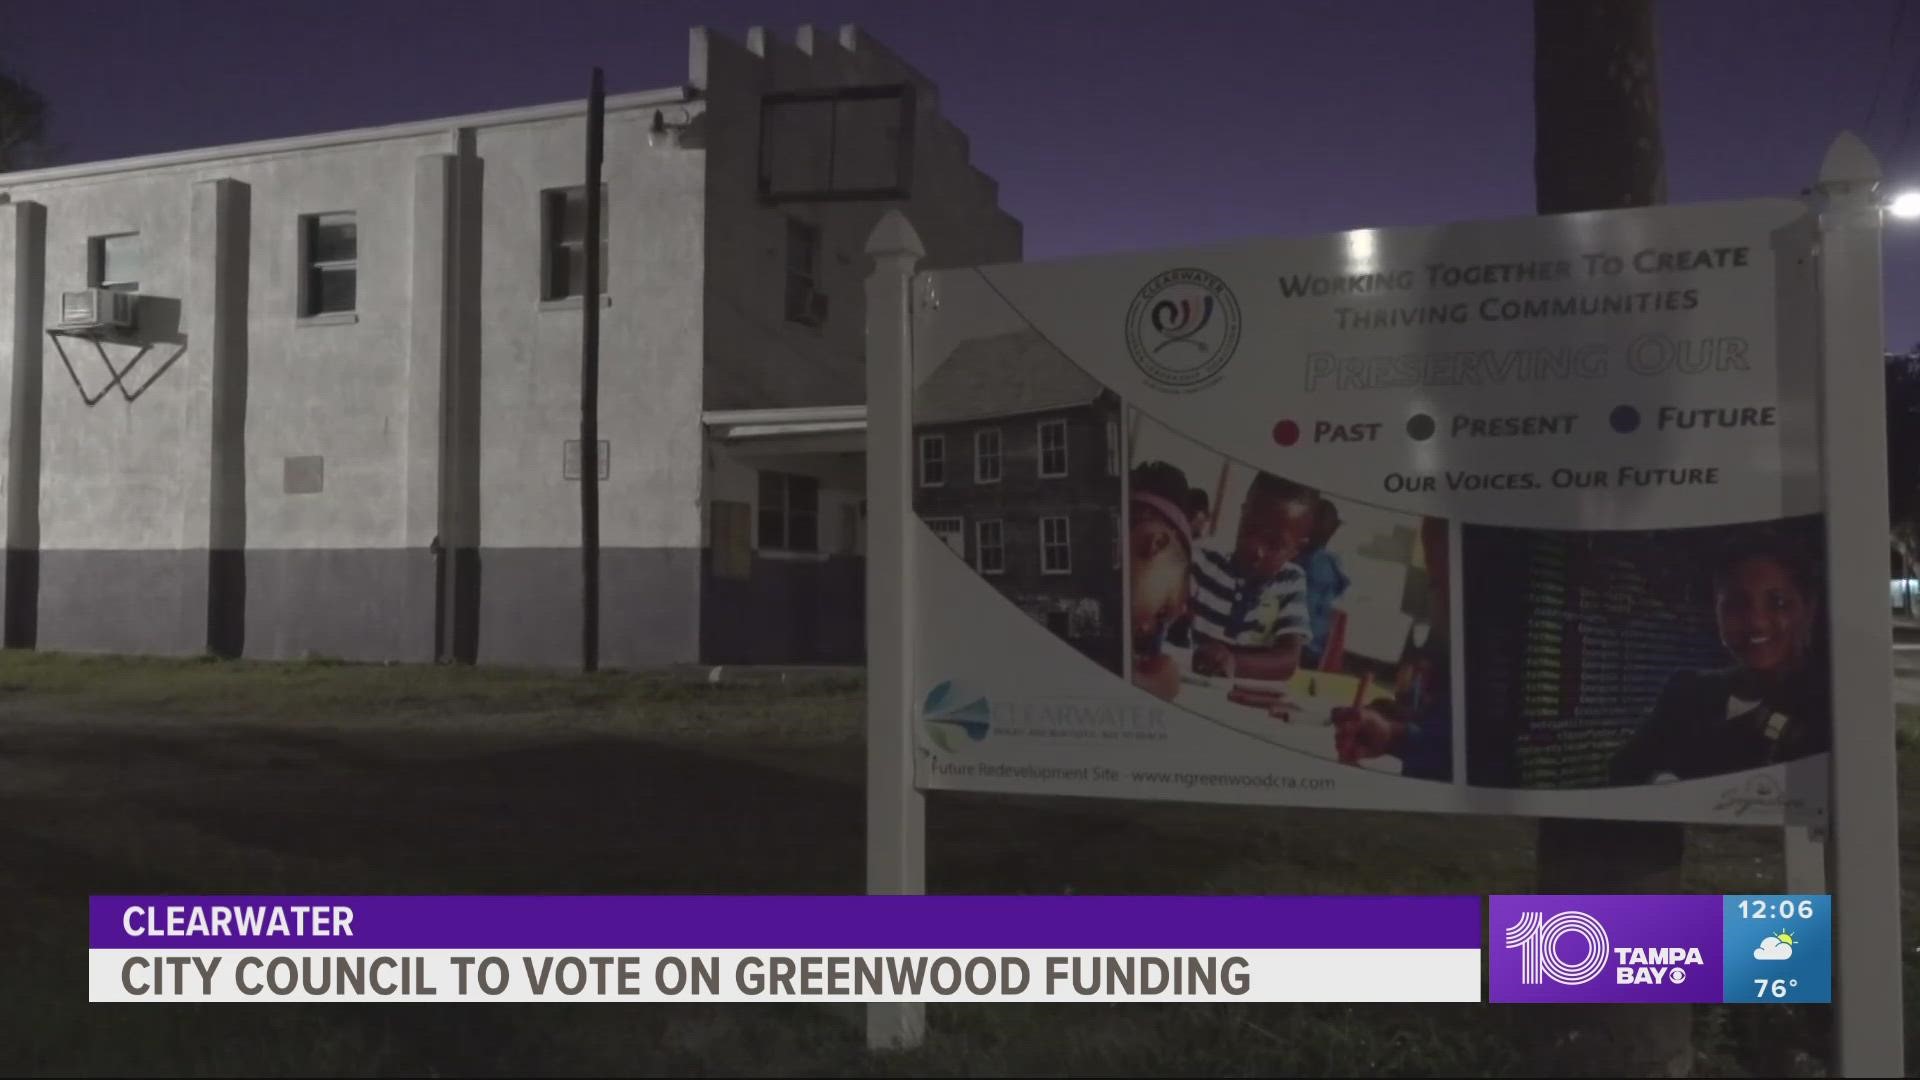 Clearwater city council is expected to approve millions of dollars to redevelop the city's "Greenwood" neighborhood.